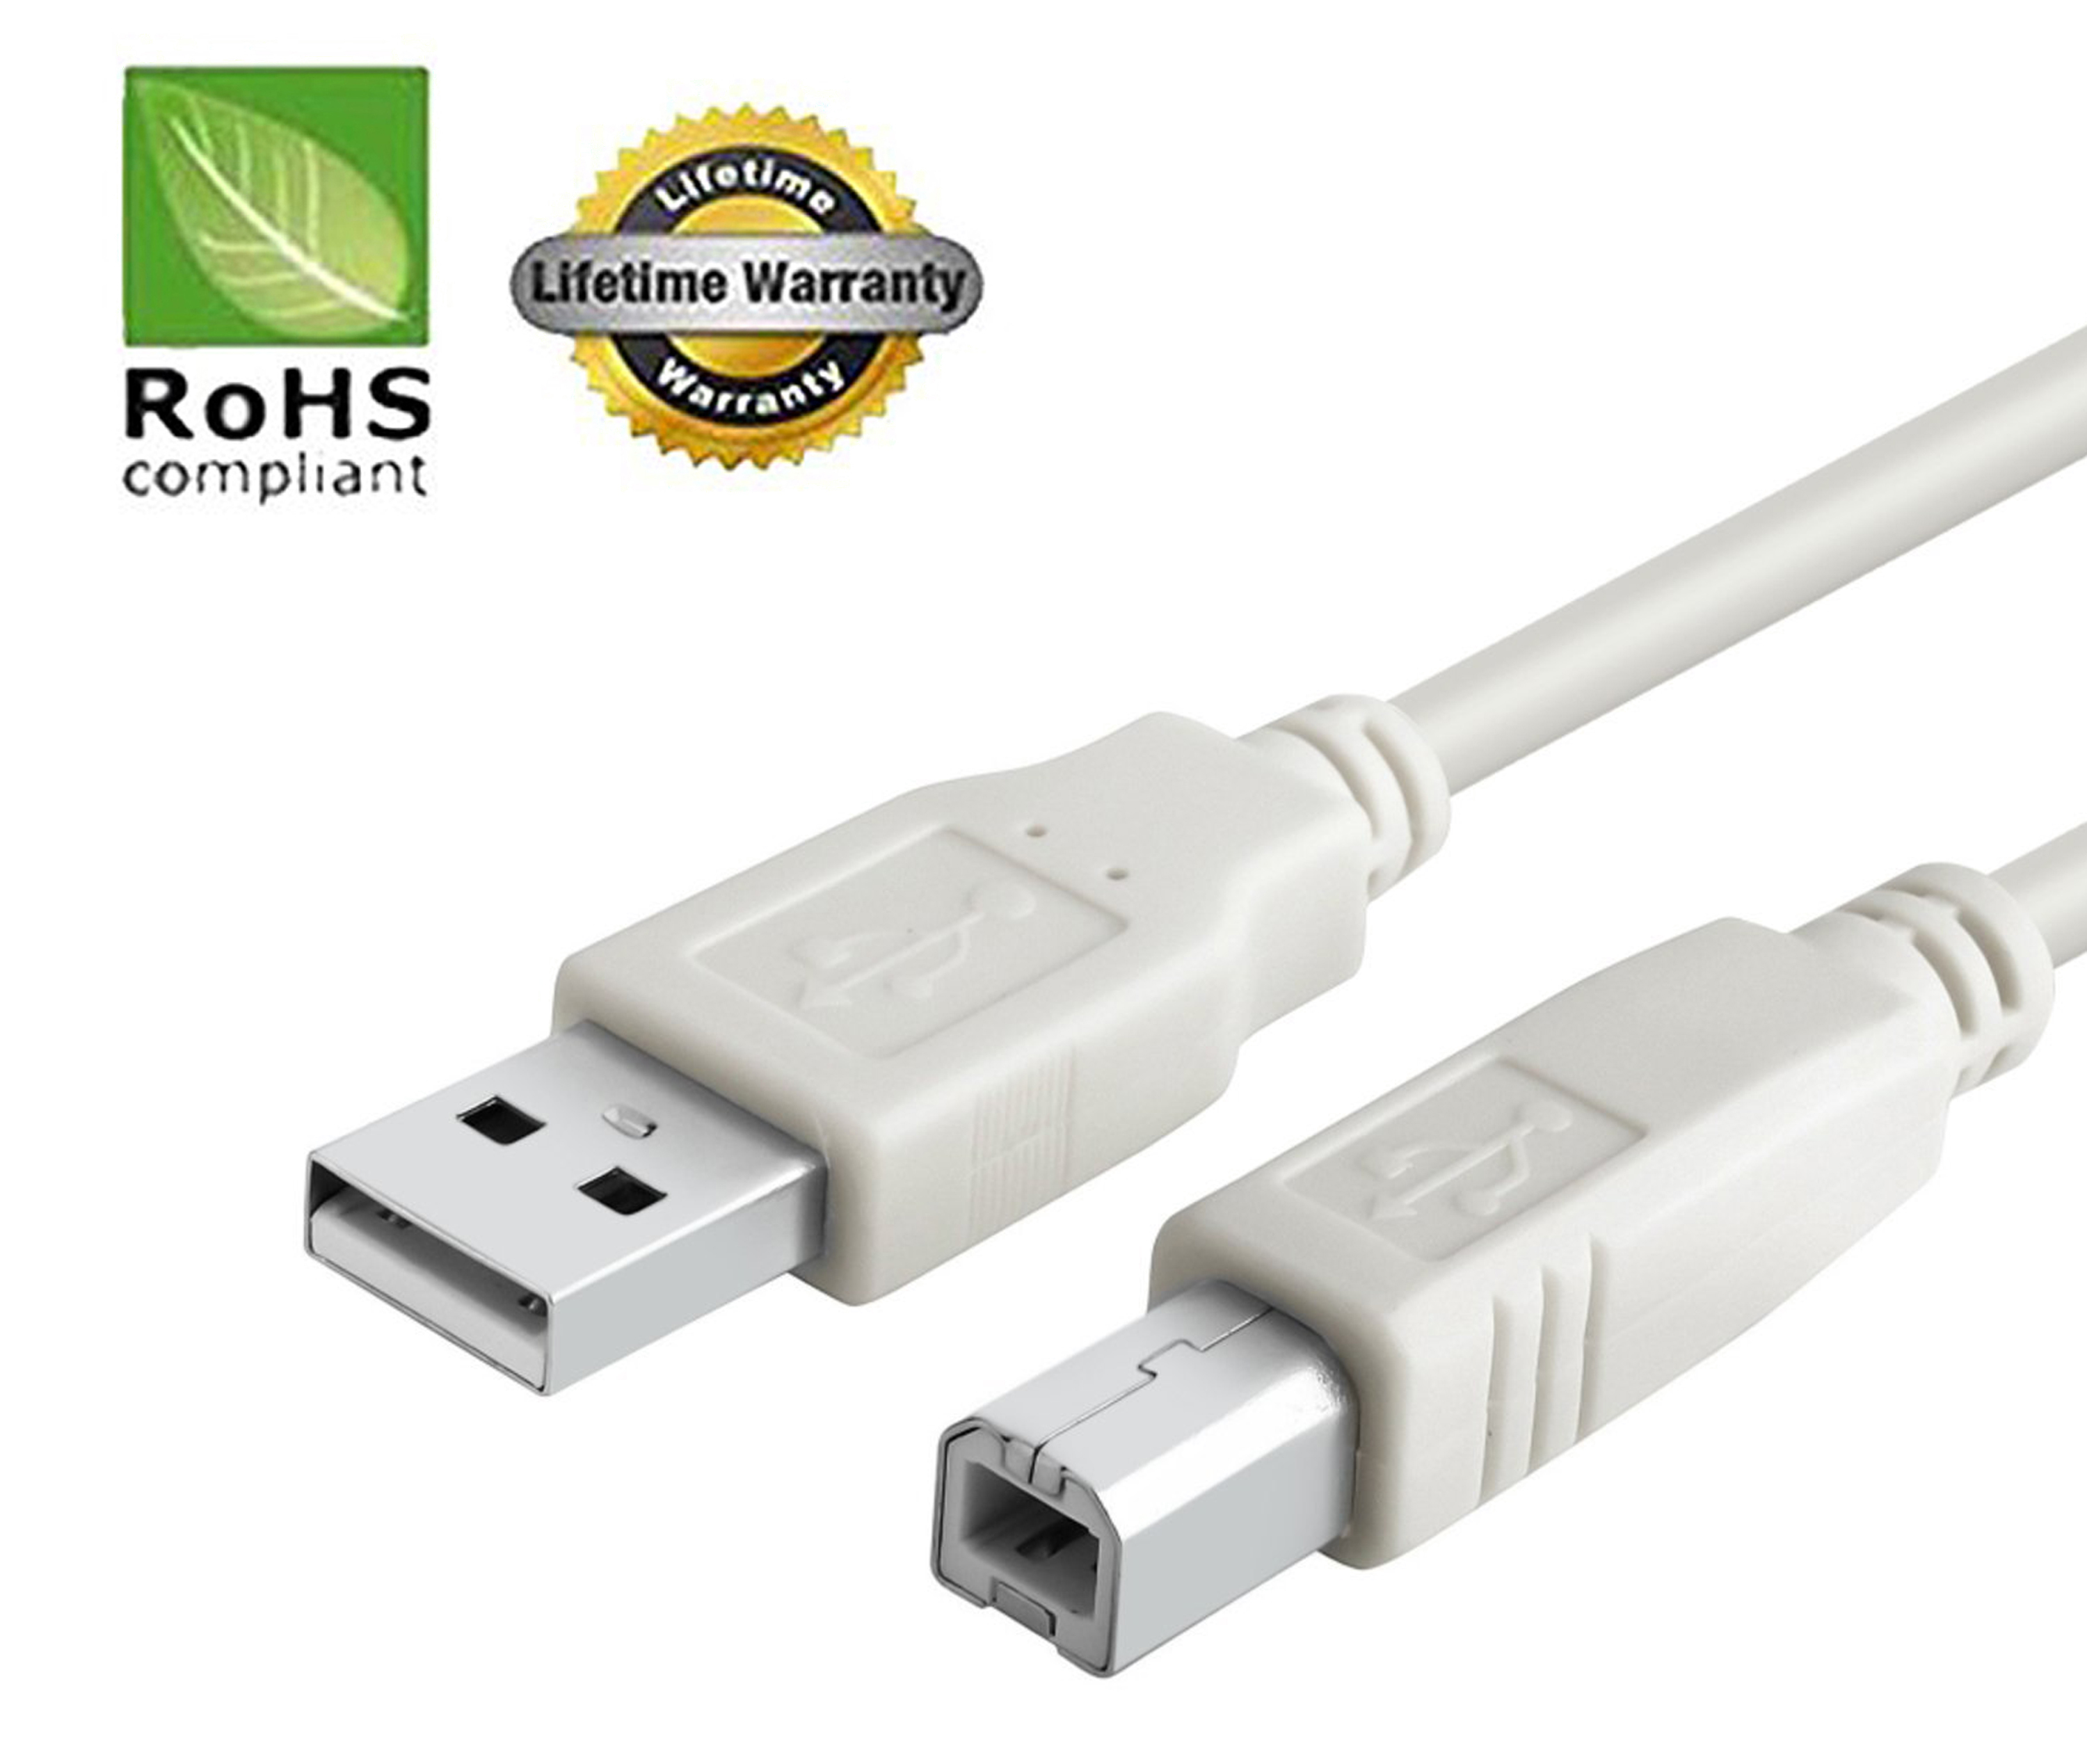 USB 2.0 Cable - A-Male to B-Male for Centrance HiFi-M8 (Specific Models Only) - 6 FT/2 PACK/IVORY - image 1 of 5